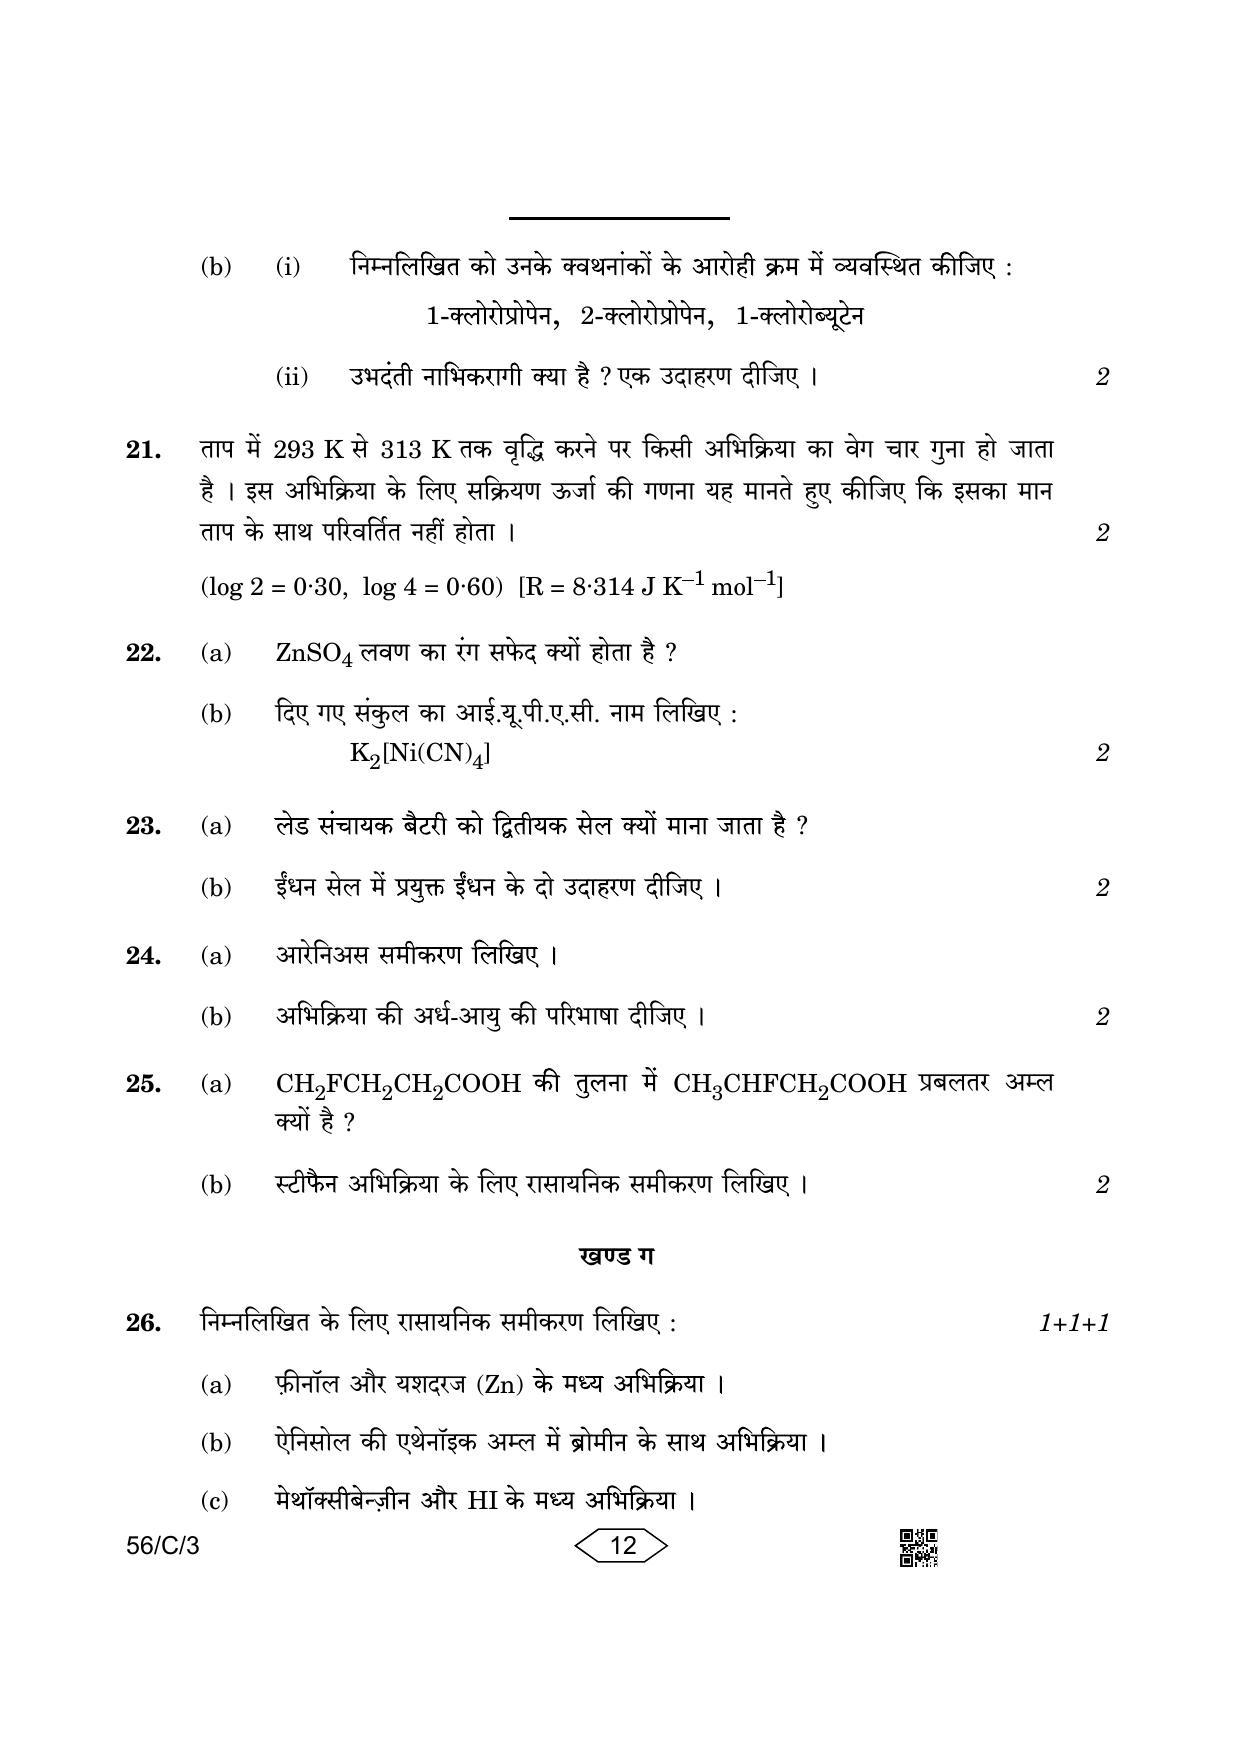 CBSE Class 12 56-3 Chemistry 2023 (Compartment) Question Paper - Page 12